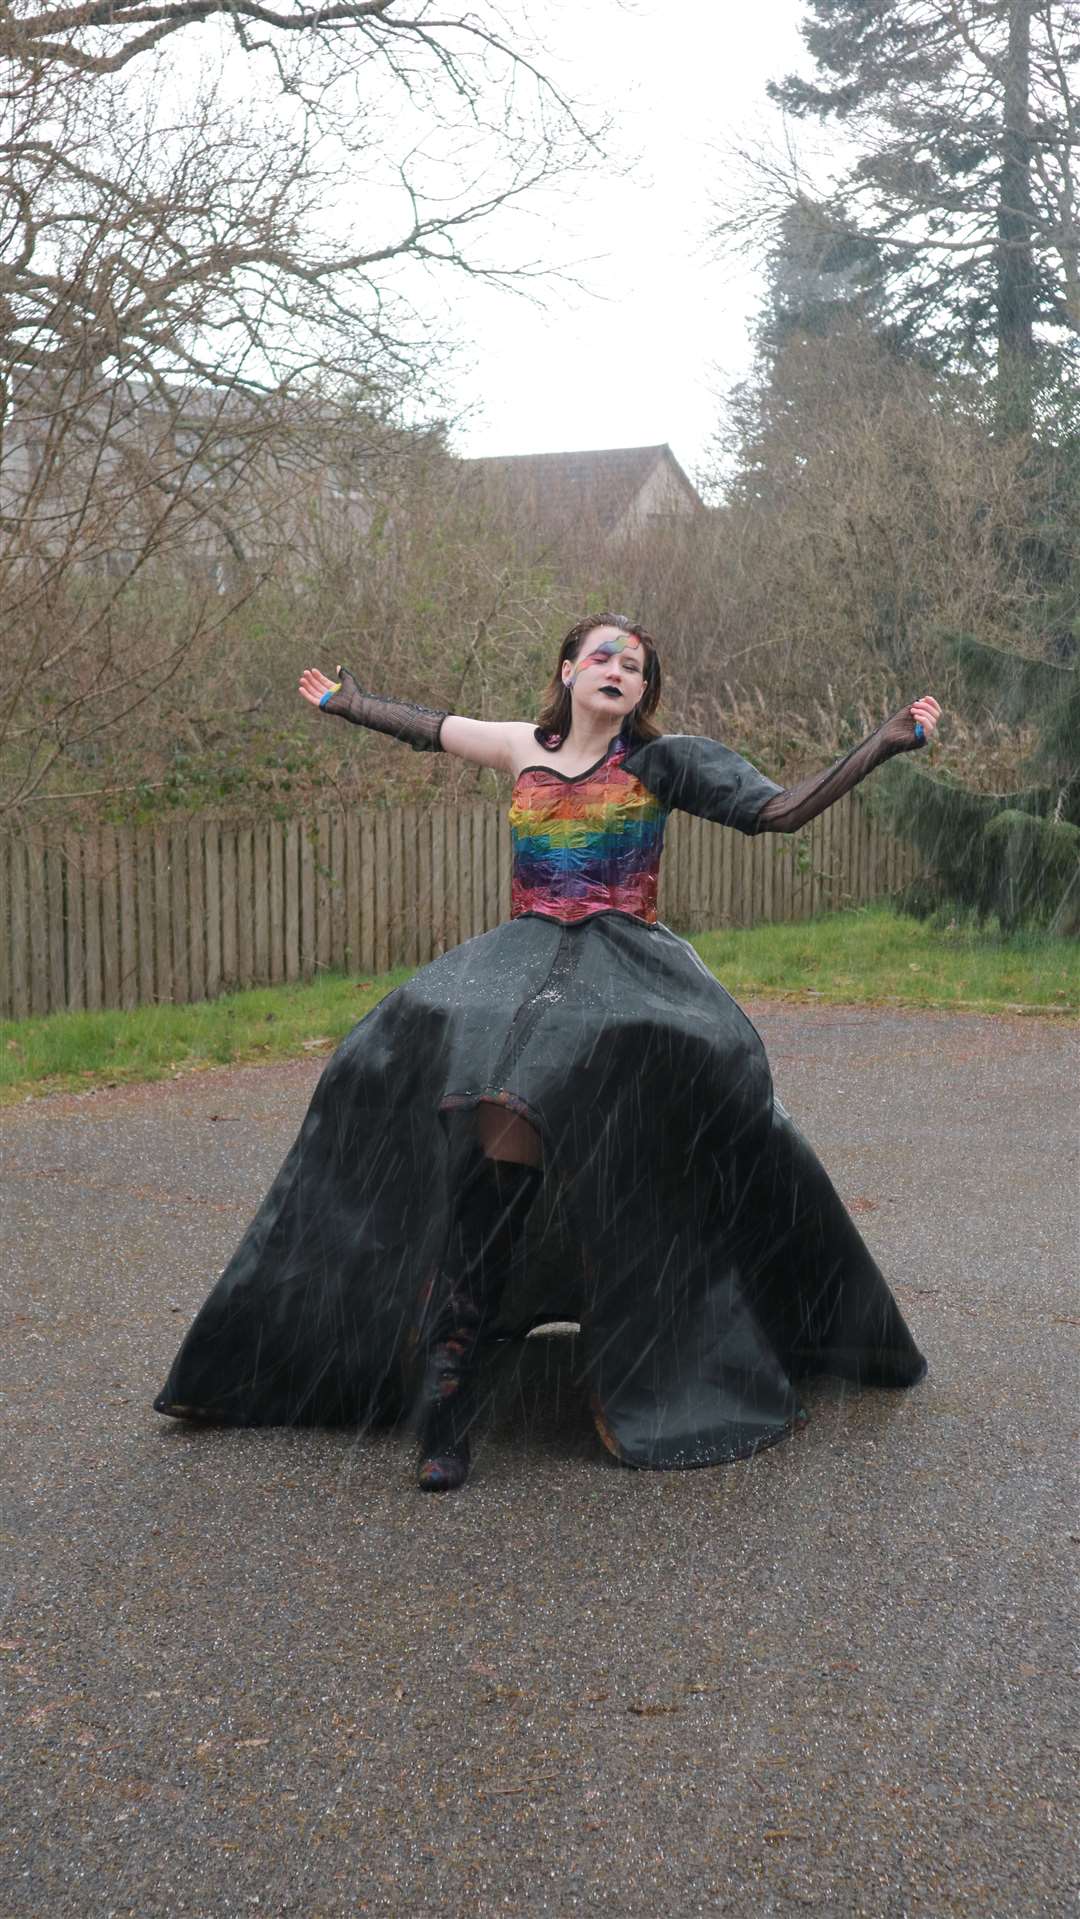 Órla Ní Eadhra created a ballgown from recycled materials including a childhood trampoline.